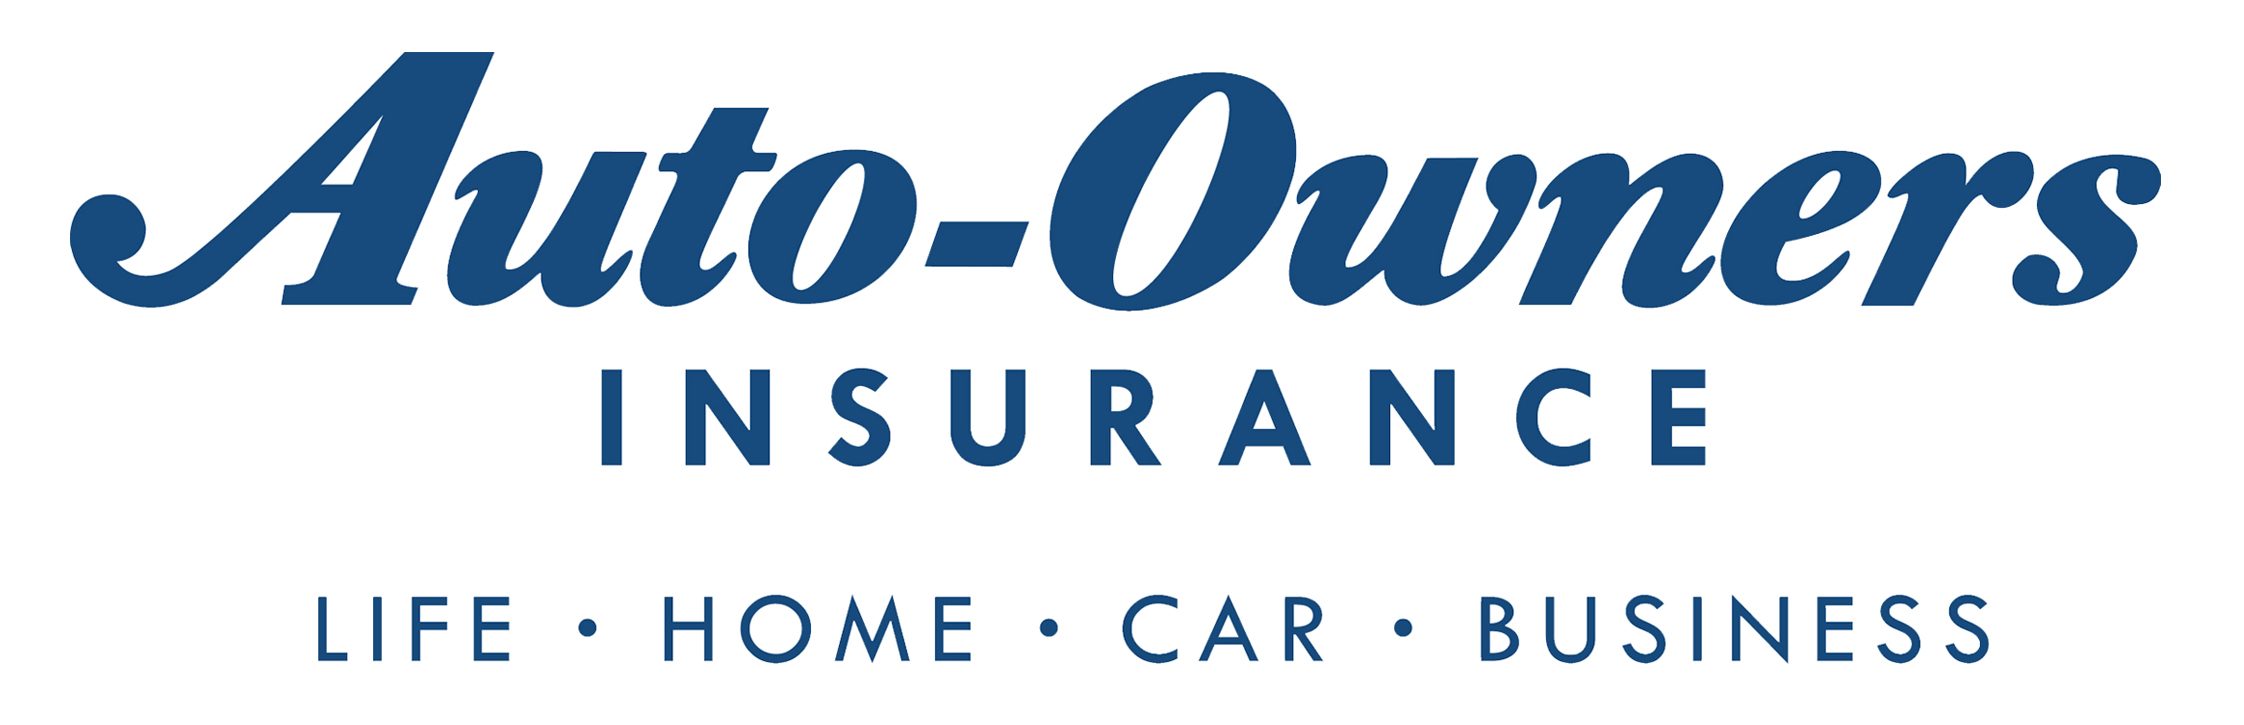 Auto owners Insurance logo